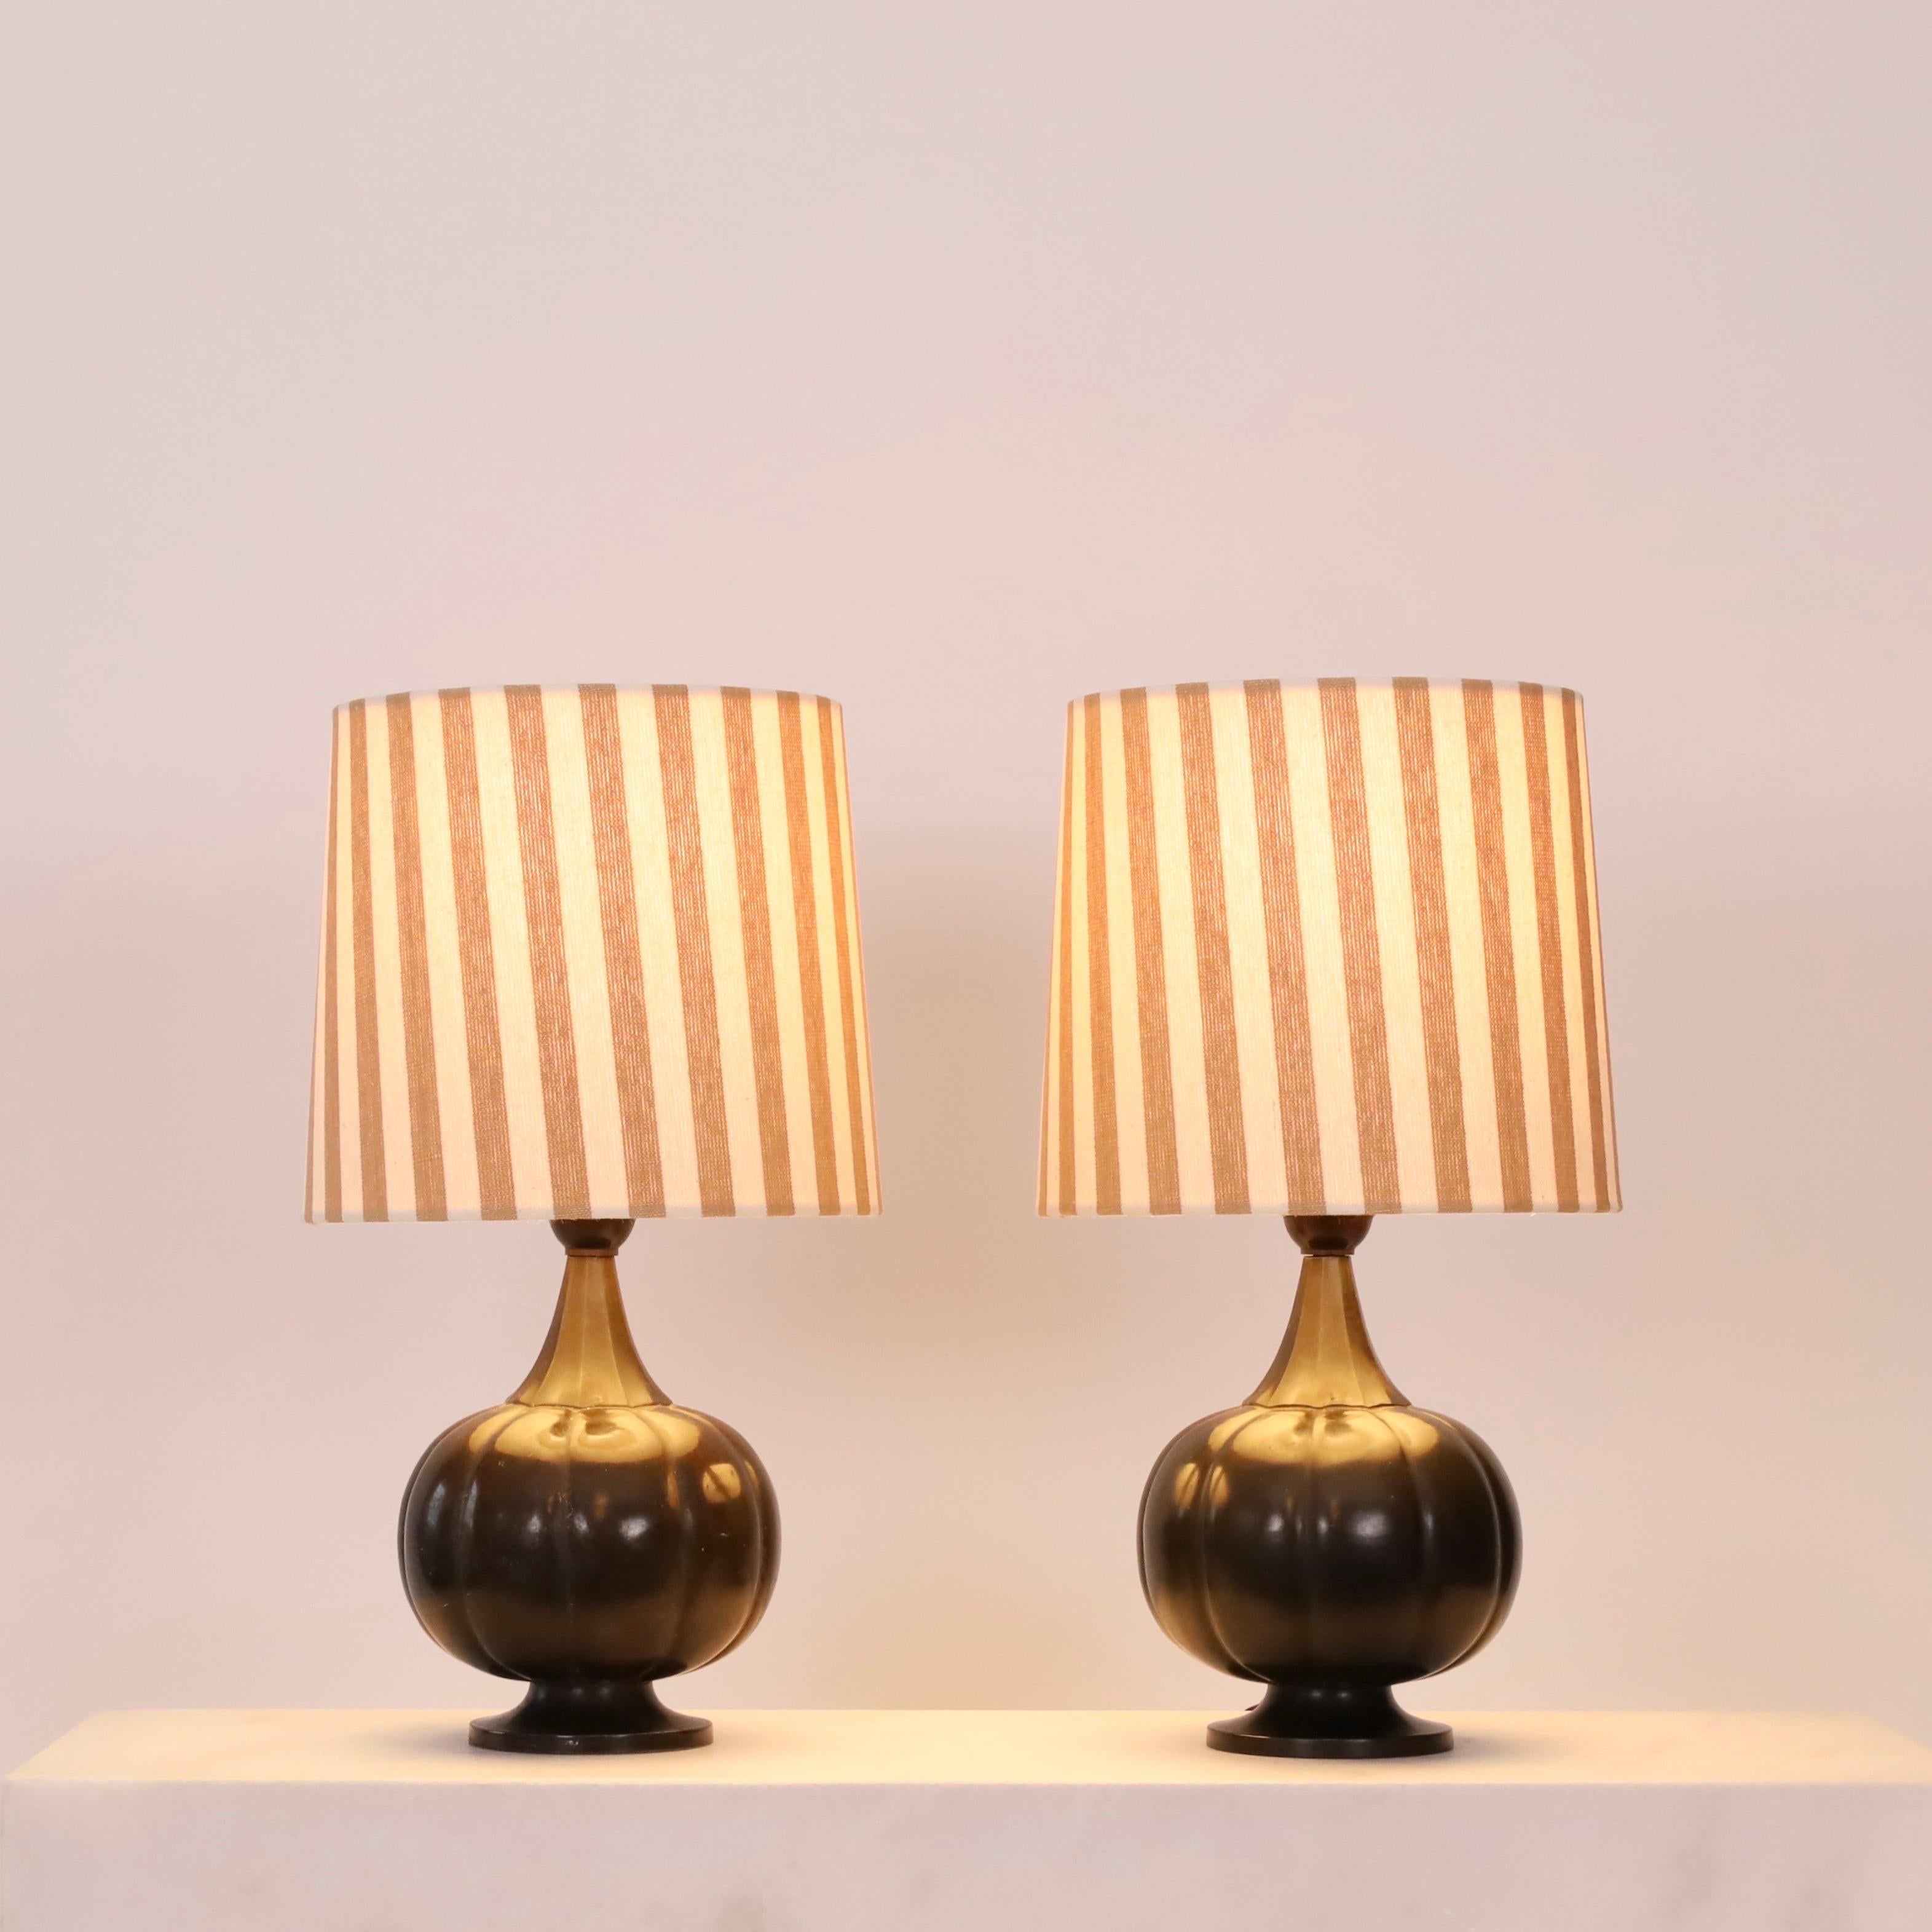 Set of round Just Andersen Table Lamps, 1920s, Denmark In Good Condition For Sale In Værløse, DK